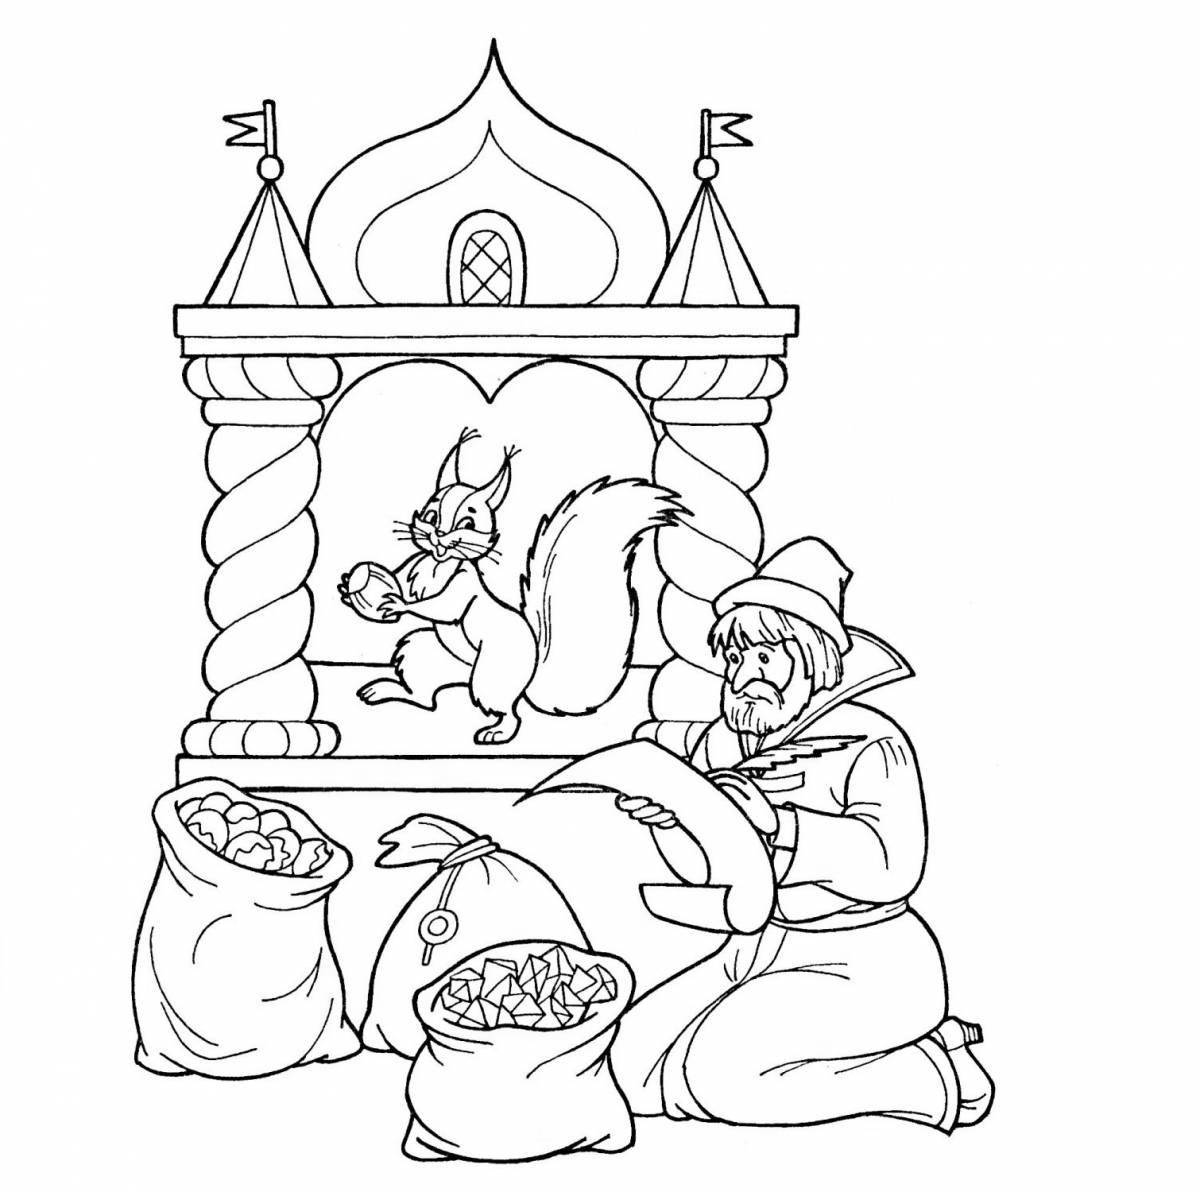 Exquisite princess swan coloring page